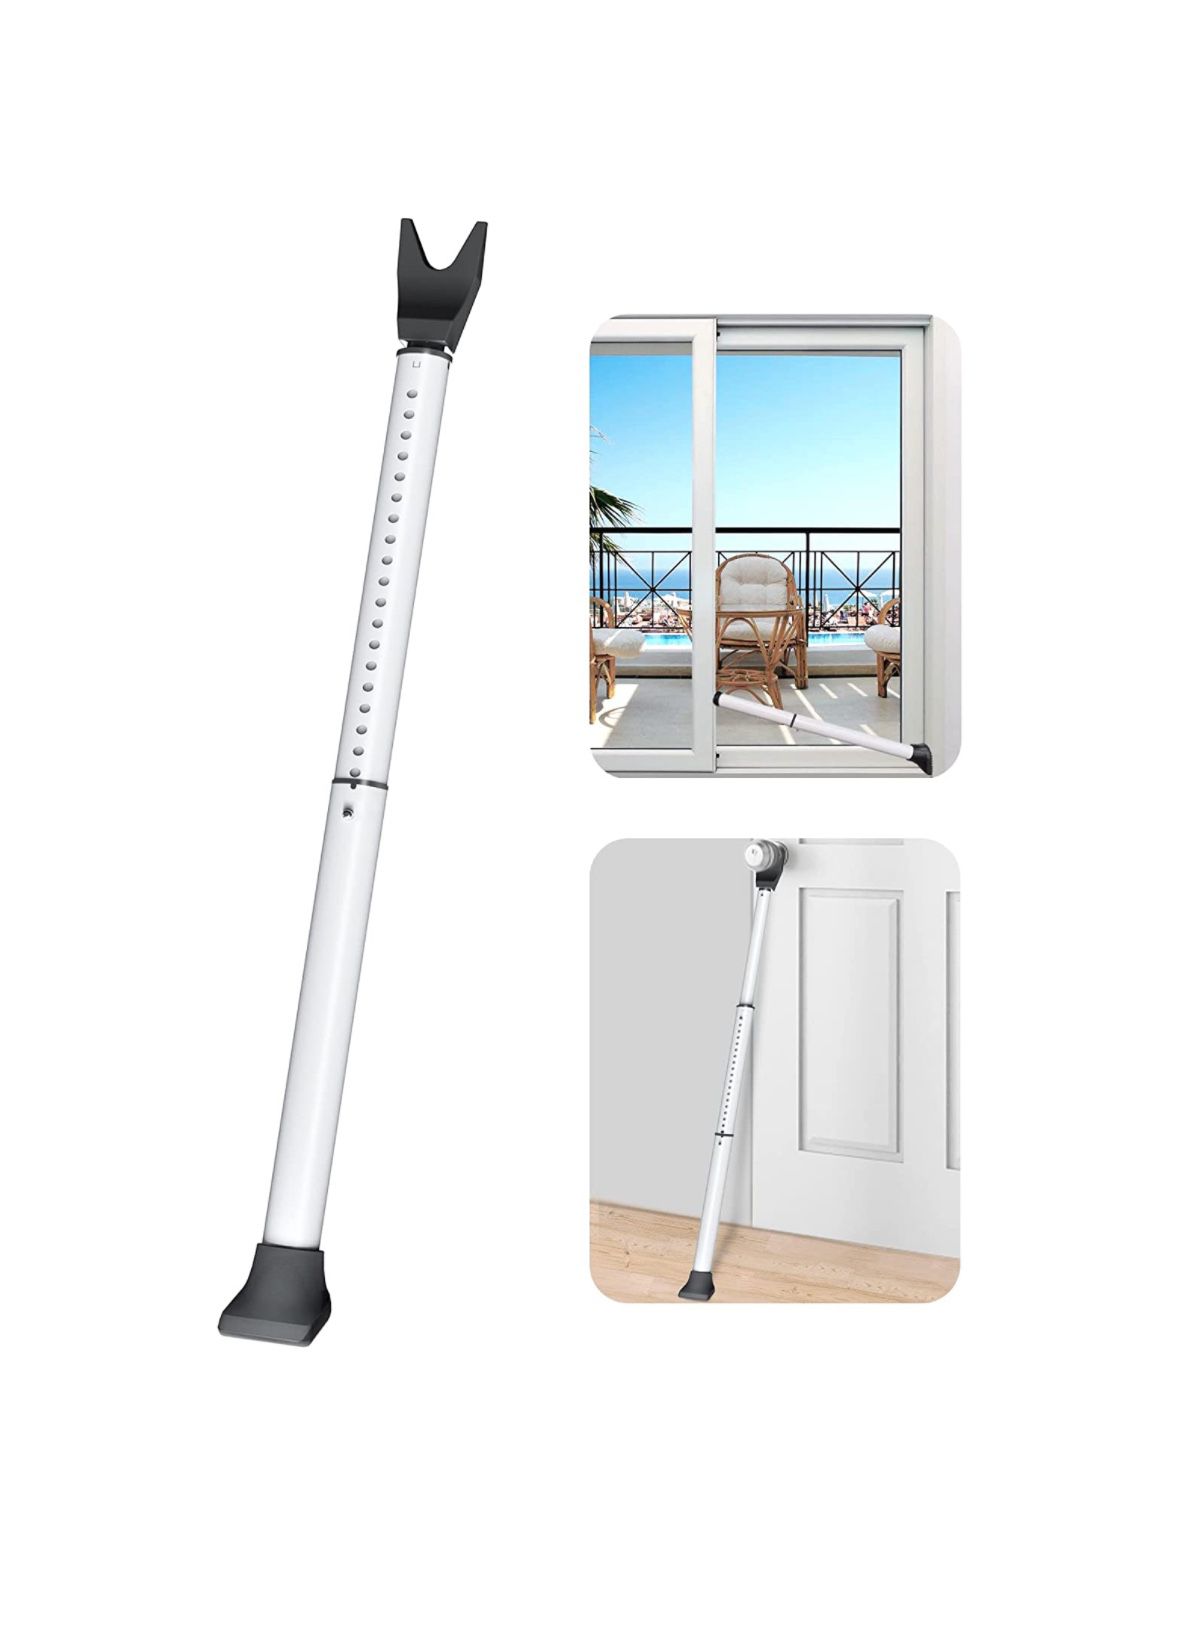 Brand New Door Window Security Bar Sliding Patio Bar Heavy Duty Stop Adjustable Jam AceMining Home Travel Air BNB $12 !!!ACCEPTING OFFERS!!!